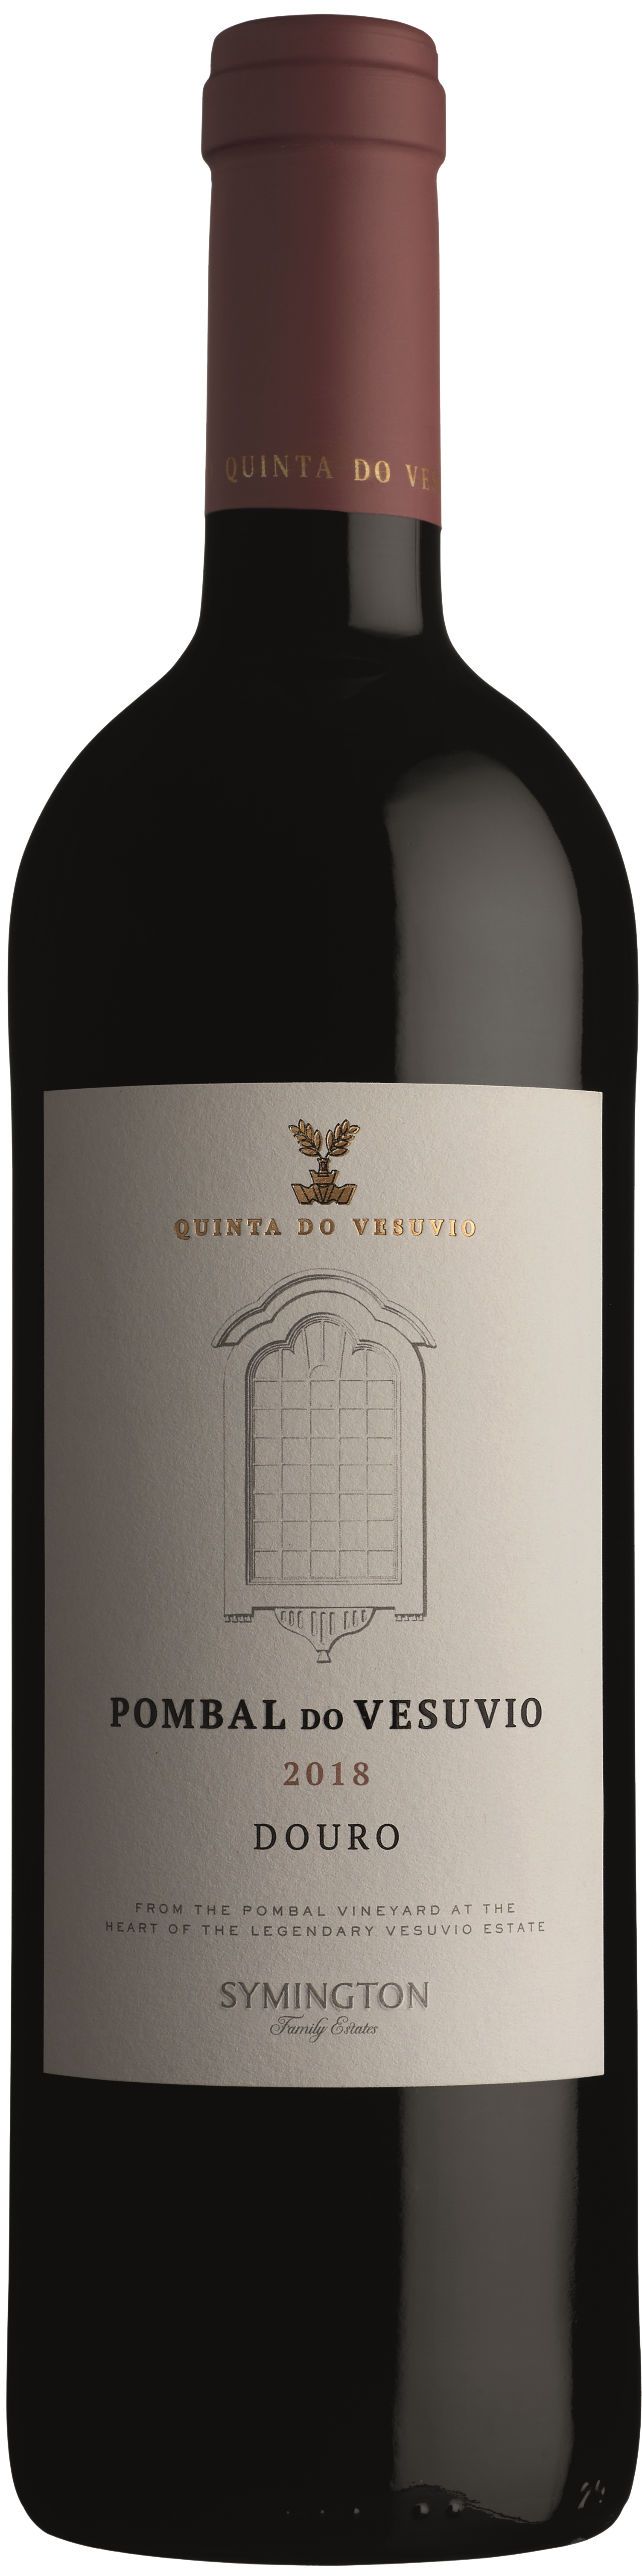 Product Image for POMBAL DO VESUVIO DOURO RED 2018